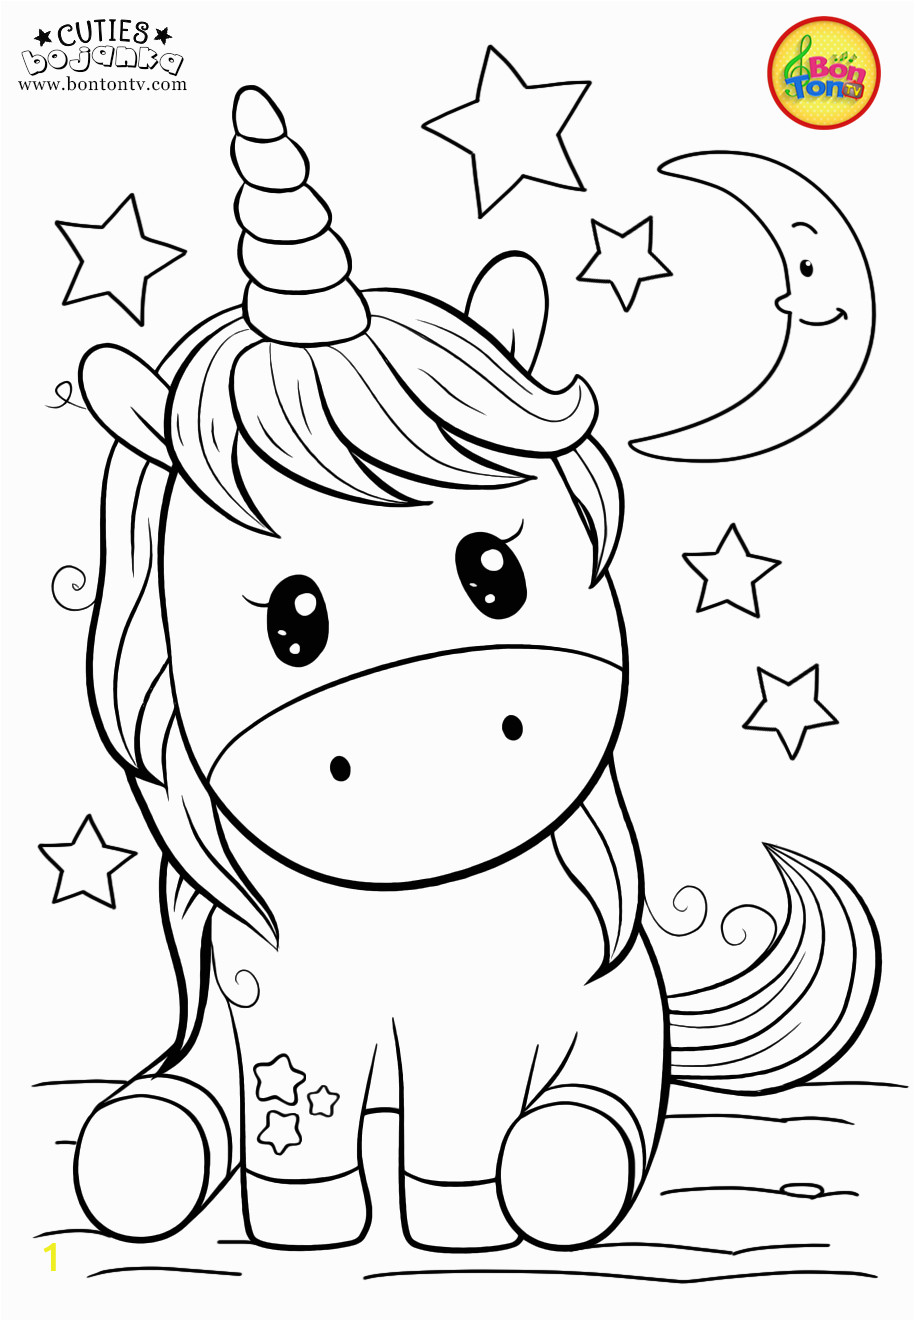 Printable Cute Animal Coloring Pages Cuties Coloring Pages for Kids Free Preschool Printables